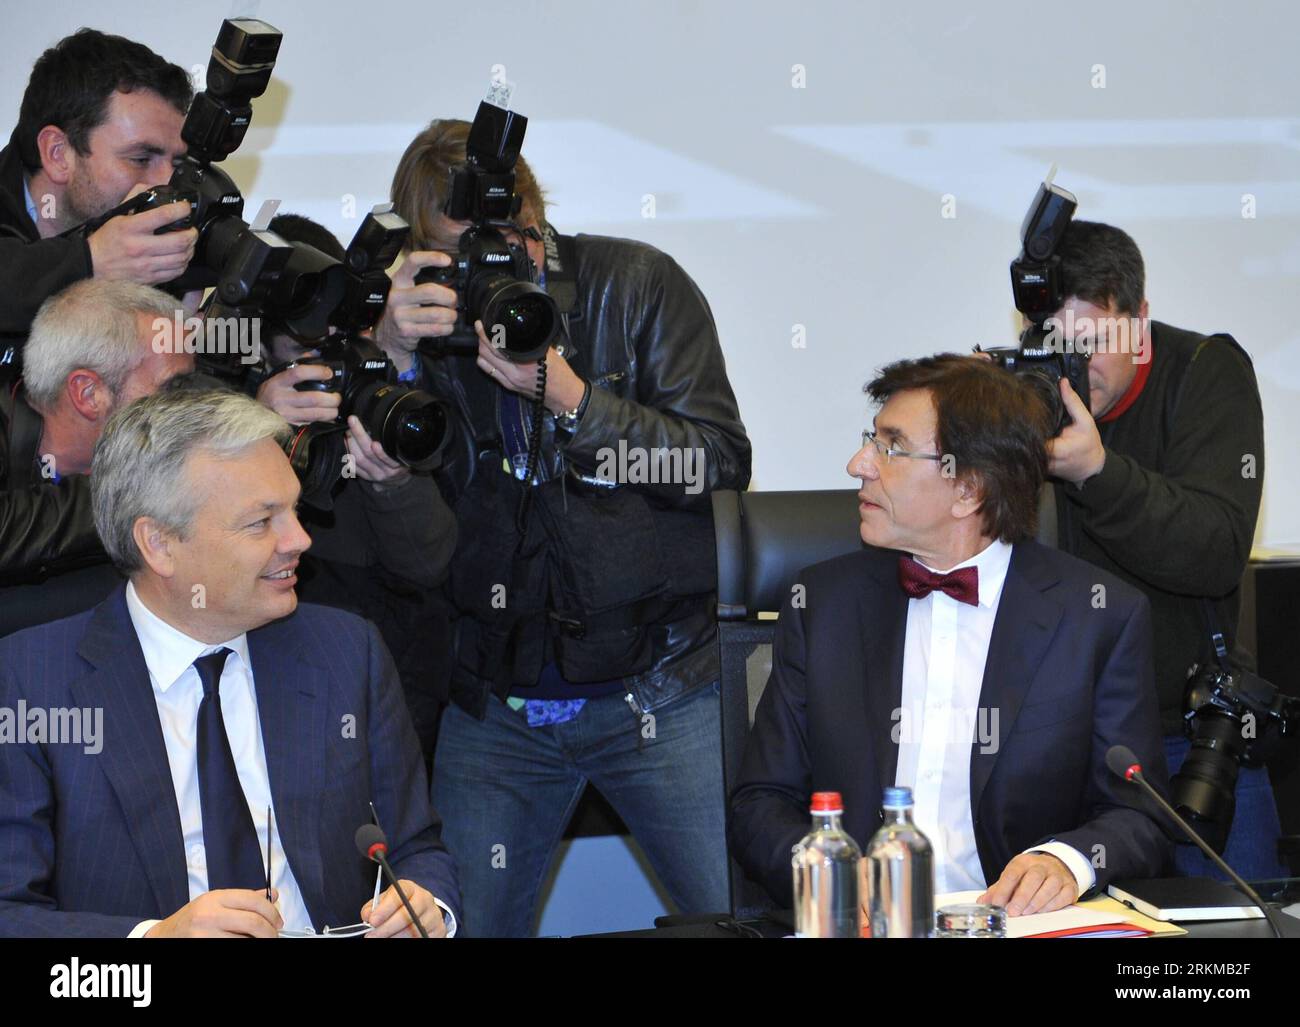 Bildnummer: 56651945  Datum: 06.12.2011  Copyright: imago/Xinhua (111206) -- BRUSSELS, Dec. 6, 2011 (Xinhua) -- Belgian new Prime Minister Elio Di Rupo (front, R) look at photographers before the first cabinet meeting in Brussels, capital of Belgium, Dec. 6, 2011. The inauguration of the new government marked the ending of a record 18-months long political deadlock of Belgium. (Xinhua/Ye Pingfan) (ypf) BELGIUM-BRUSSELS-NEW GOVERNMENT PUBLICATIONxNOTxINxCHN People Politik neue Regierung Belgien x0x xtm 2011 quer      56651945 Date 06 12 2011 Copyright Imago XINHUA  Brussels DEC 6 2011 XINHUA Be Stock Photo